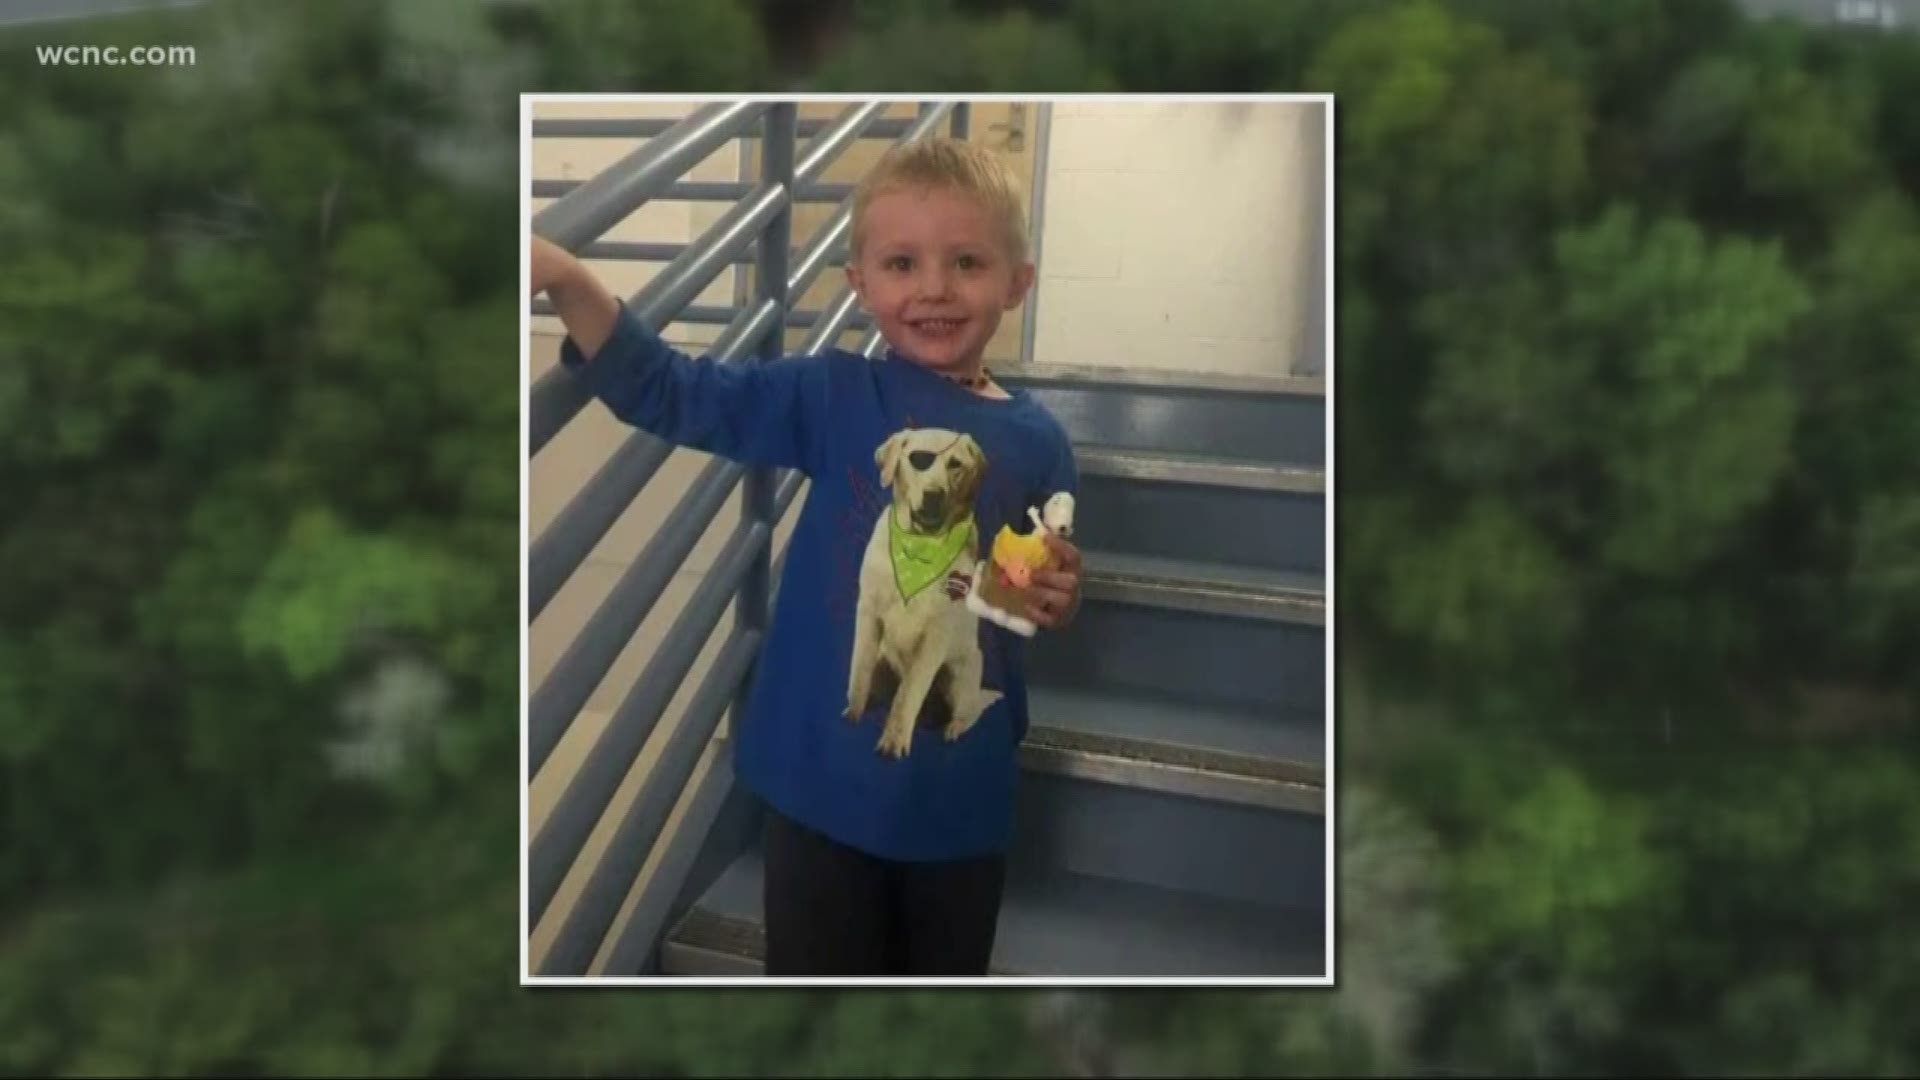 Moms across the Carolinas are heartbroken after the search for Maddox Ritch came to a tragic end.